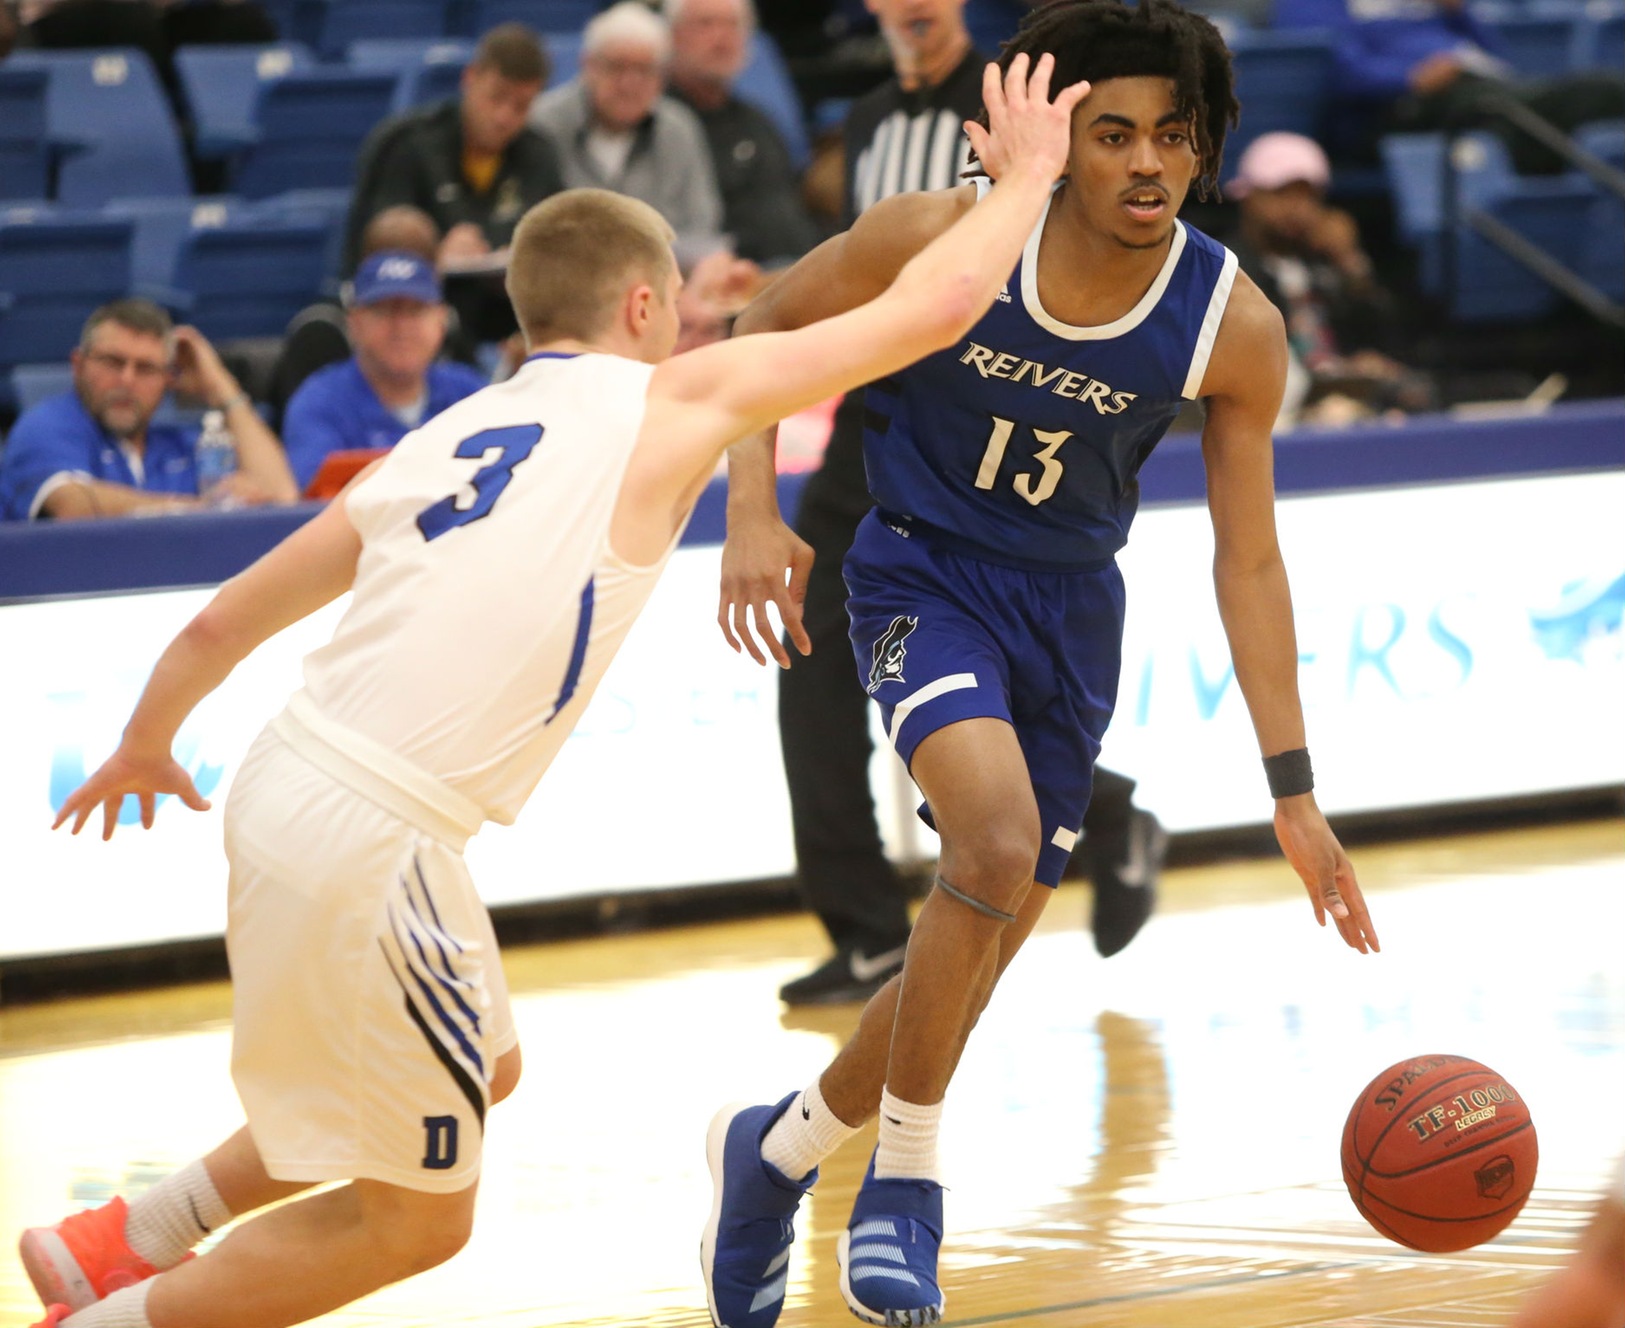 Jalen Dalcourt along with their Reiver teammates fell to the hosting State Fair Roadrunners in day 1 of the Iowa / Missouri Challenge.